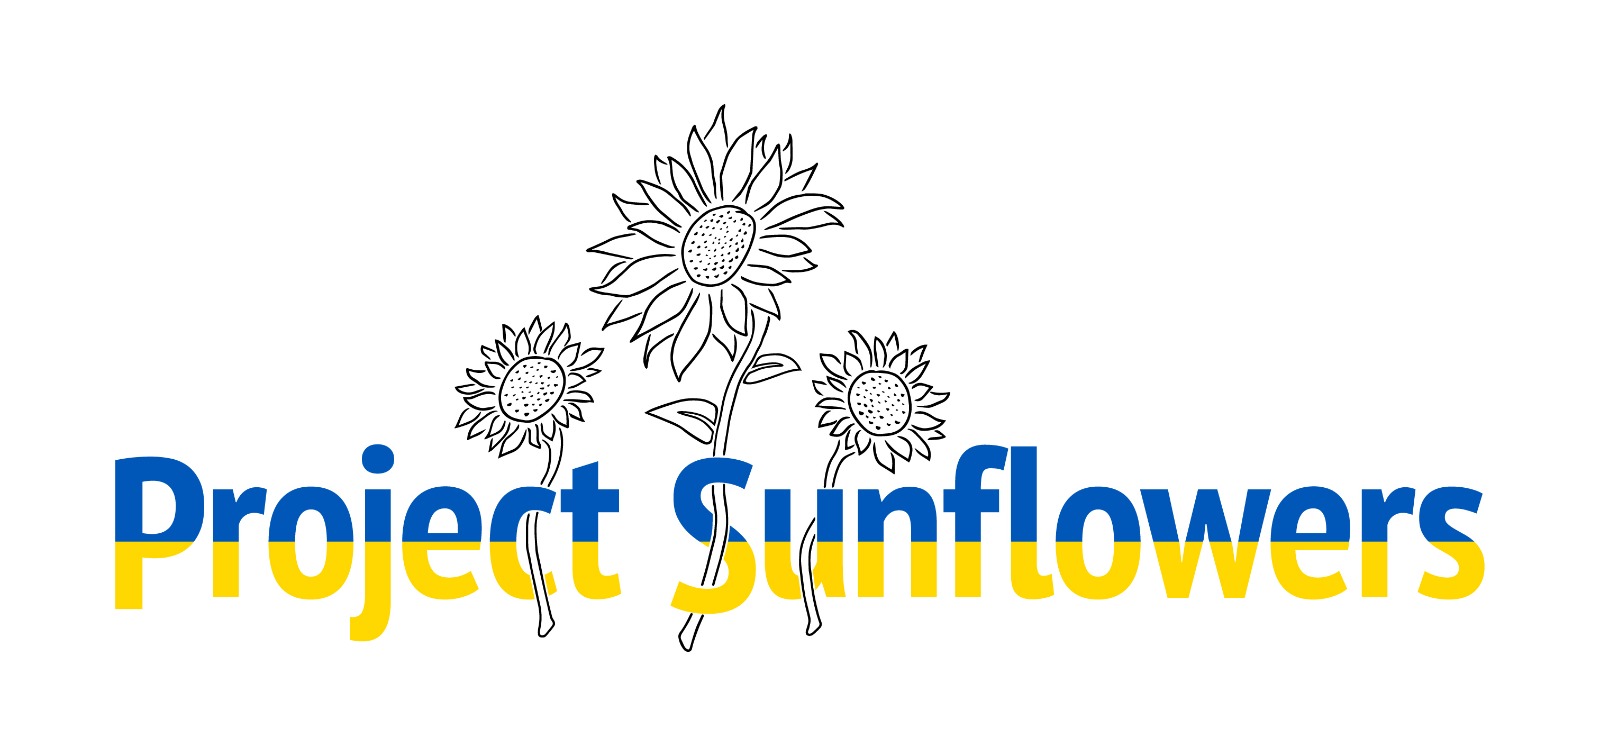 Project Sunflowers